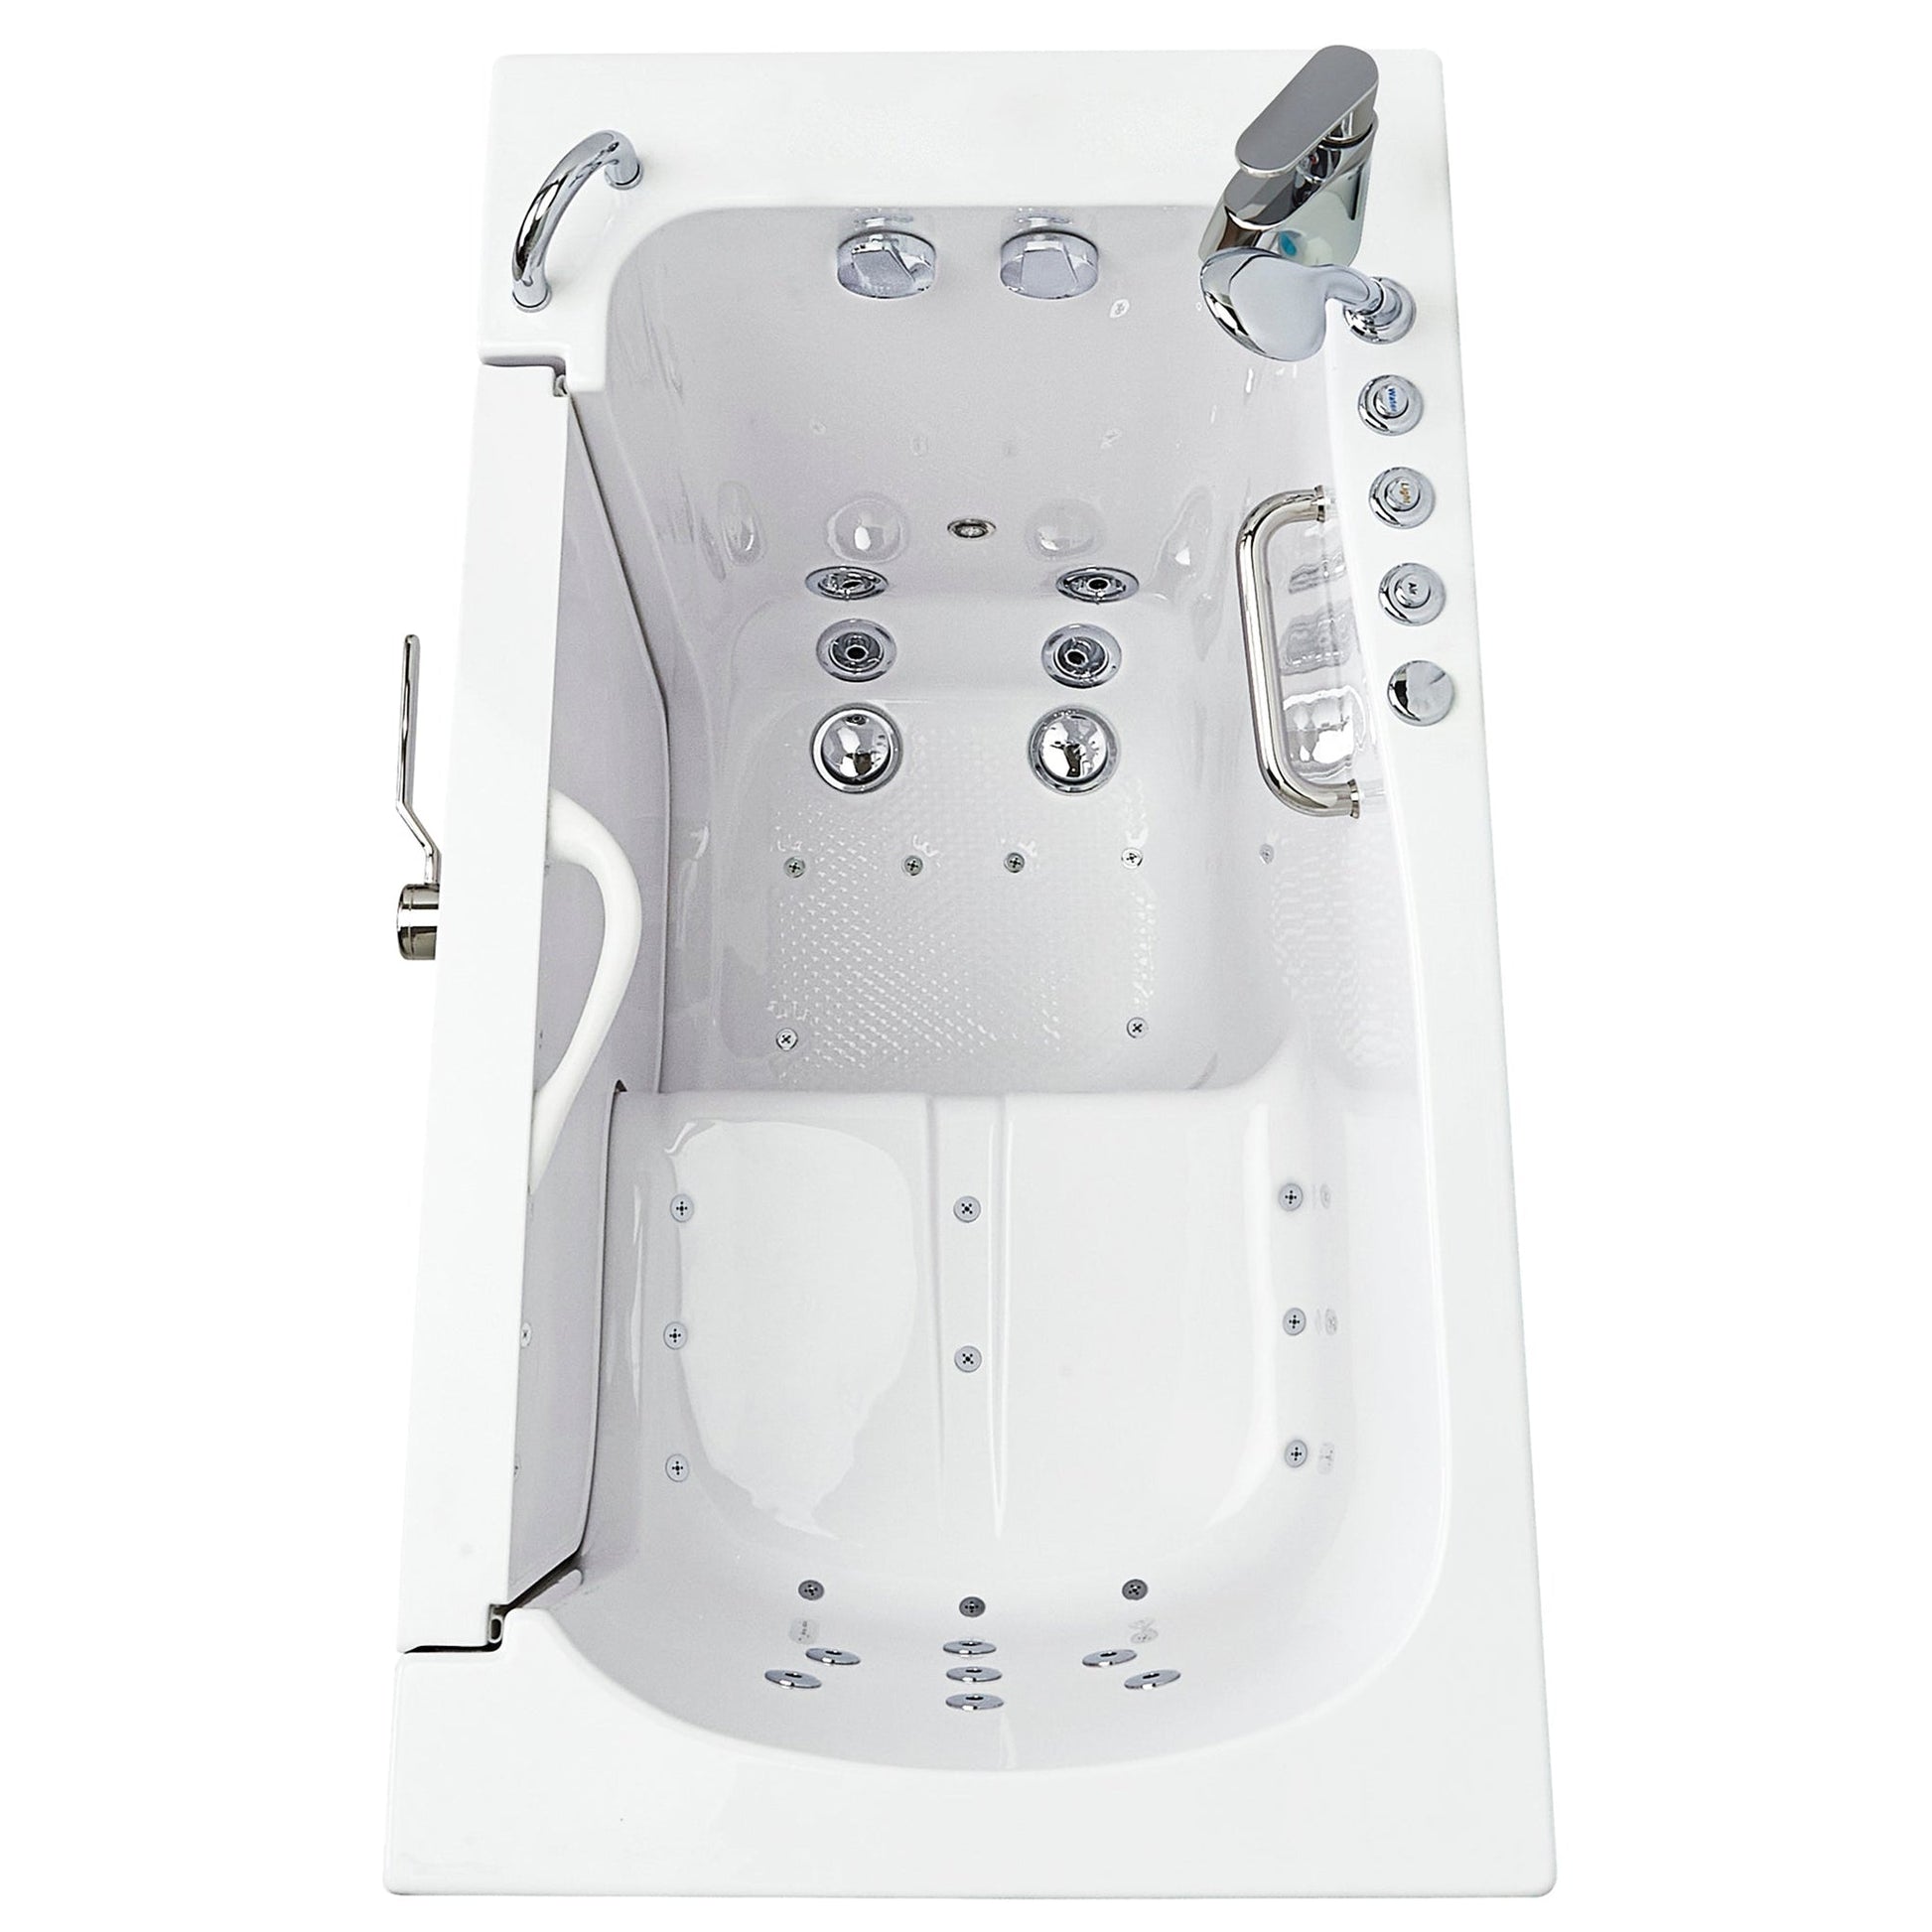 Ella's Bubbles Transfer 30" x 52" White Acrylic Air and Hydro Massage Walk-In Bathtub With 2-Piece Fast Fill Faucet, 2" Dual Drain, Right L-Shape Outswing Door and Heated Seat